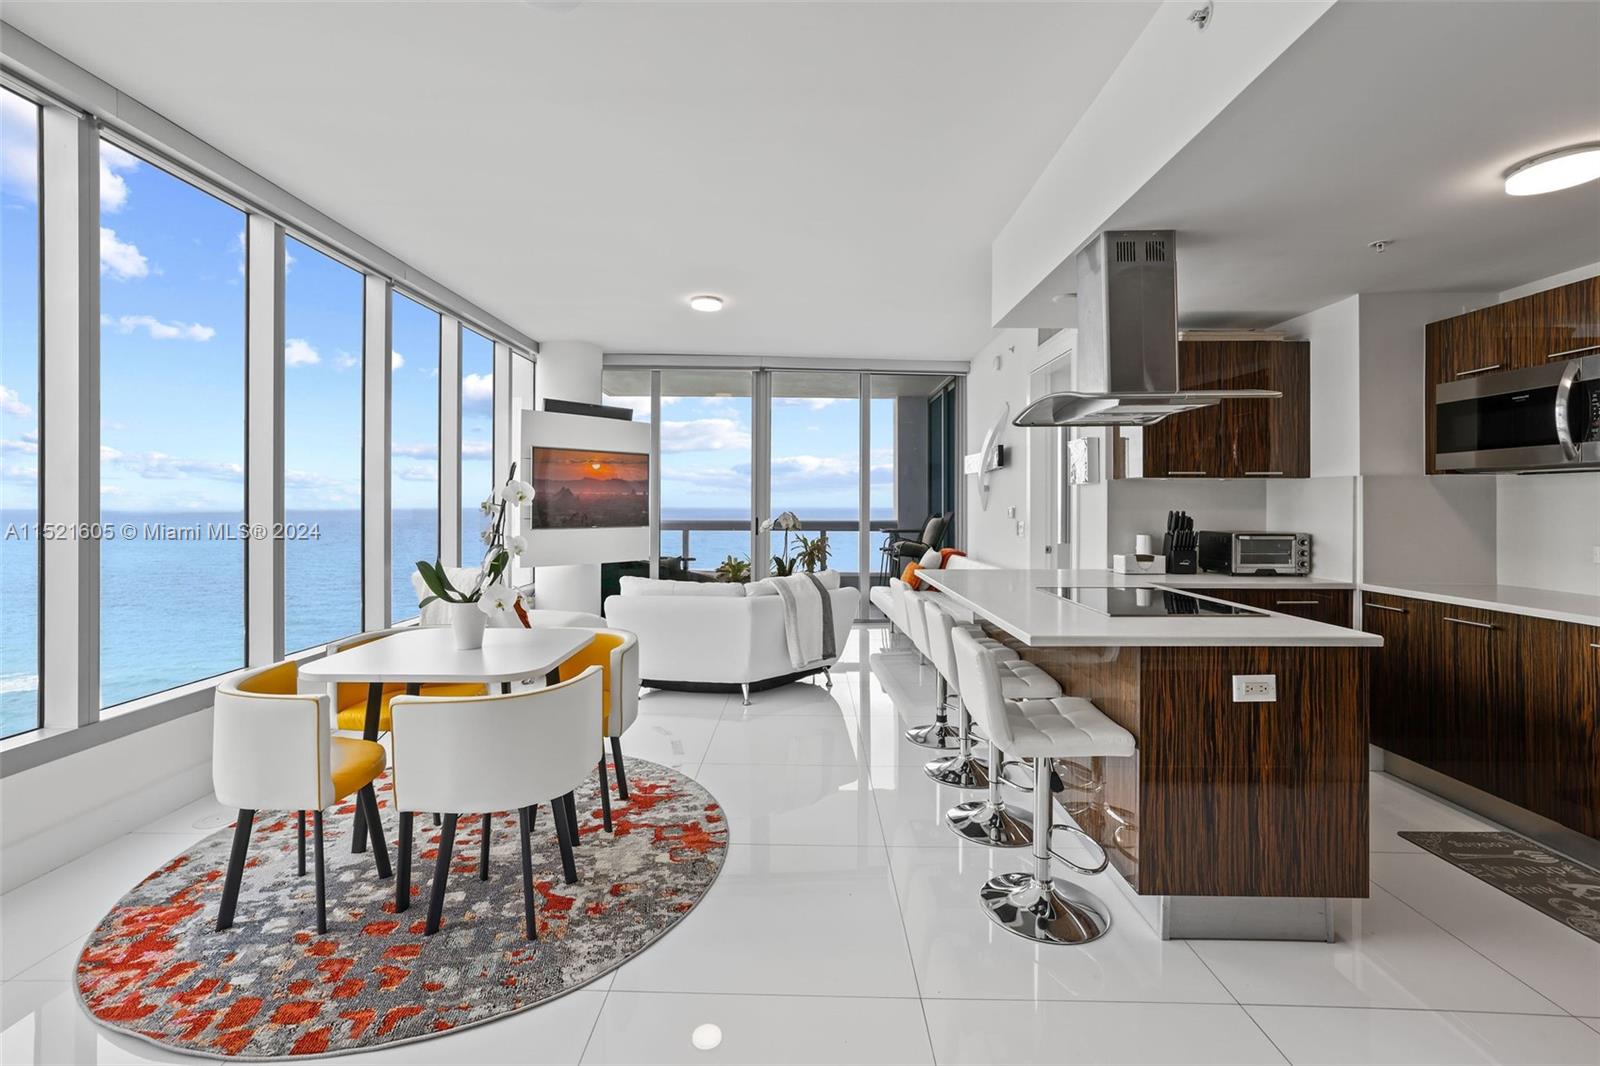 This stunning 2 bed/2 bath corner unit at the Carillon Beach Resort in Miami Beach offers breathtaking ocean views from every angle. The window treatments add a touch of sophistication, while allowing you to control the amount of natural light entering the space. The spacious layout of this corner unit provides the perfect setting for relaxation and entertaining, with the open living and dining areas leading out to the private balcony, where you can take in the breathtaking views of the ocean. The two bedrooms offer comfortable and stylish accommodation, with ample closet space. The Carillon Beach is a world-renowned destination for luxury and wellness, offering a wide range of amenities including a 70,000 square foot spa, fitness & dining options. virtual tour available!